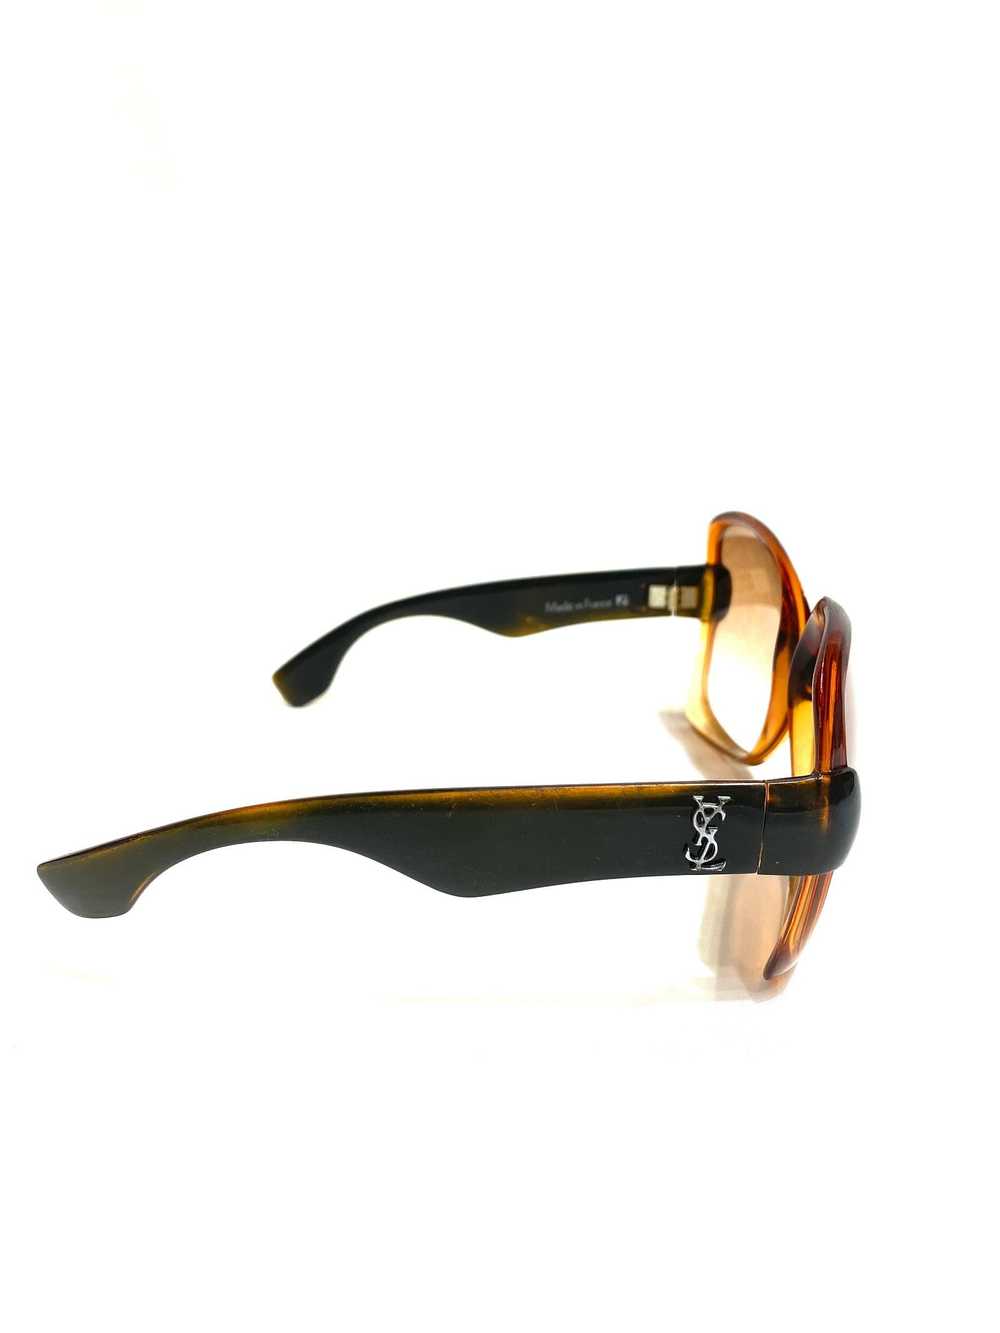 Vintage YSL Brown and Black Square Sunglasses - image 11